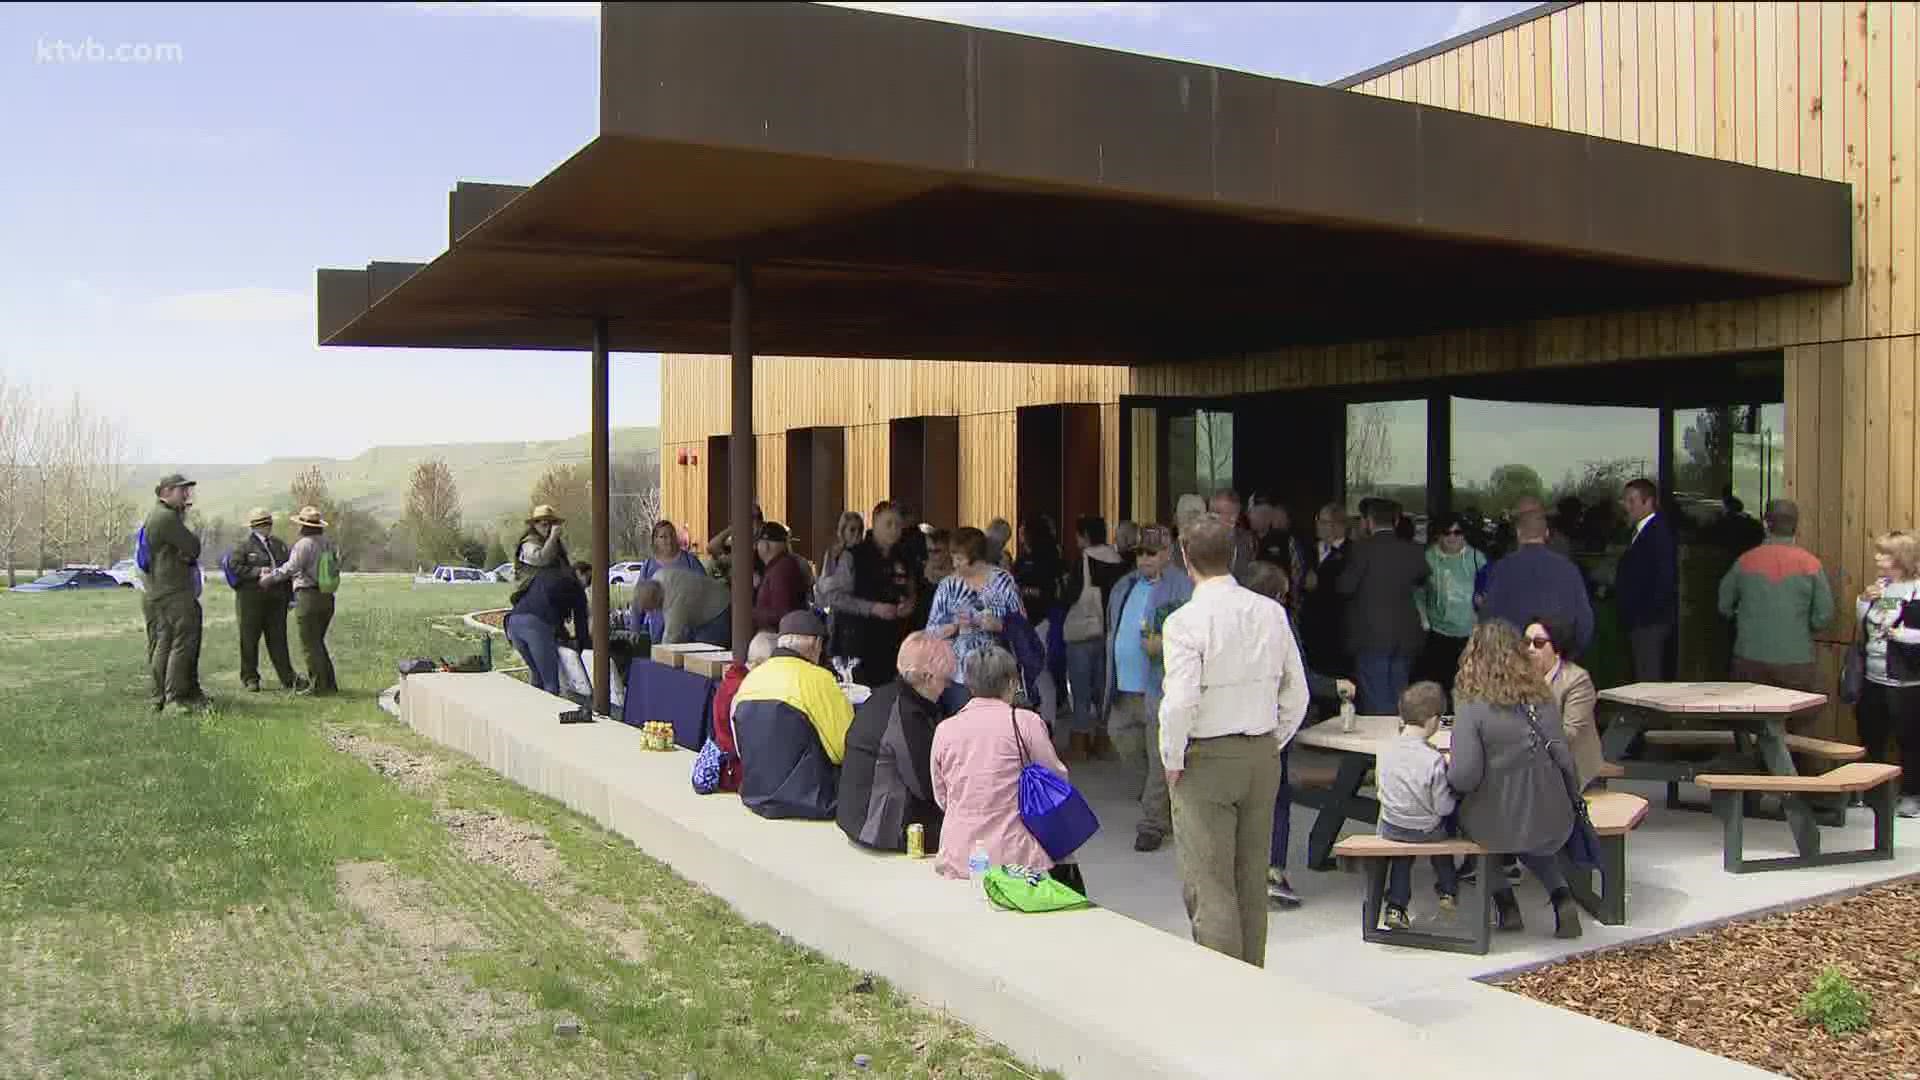 Gov. Brad Little was joined by state and local government officials in unveiling the new visitors center at Thousand Springs State Park later today.